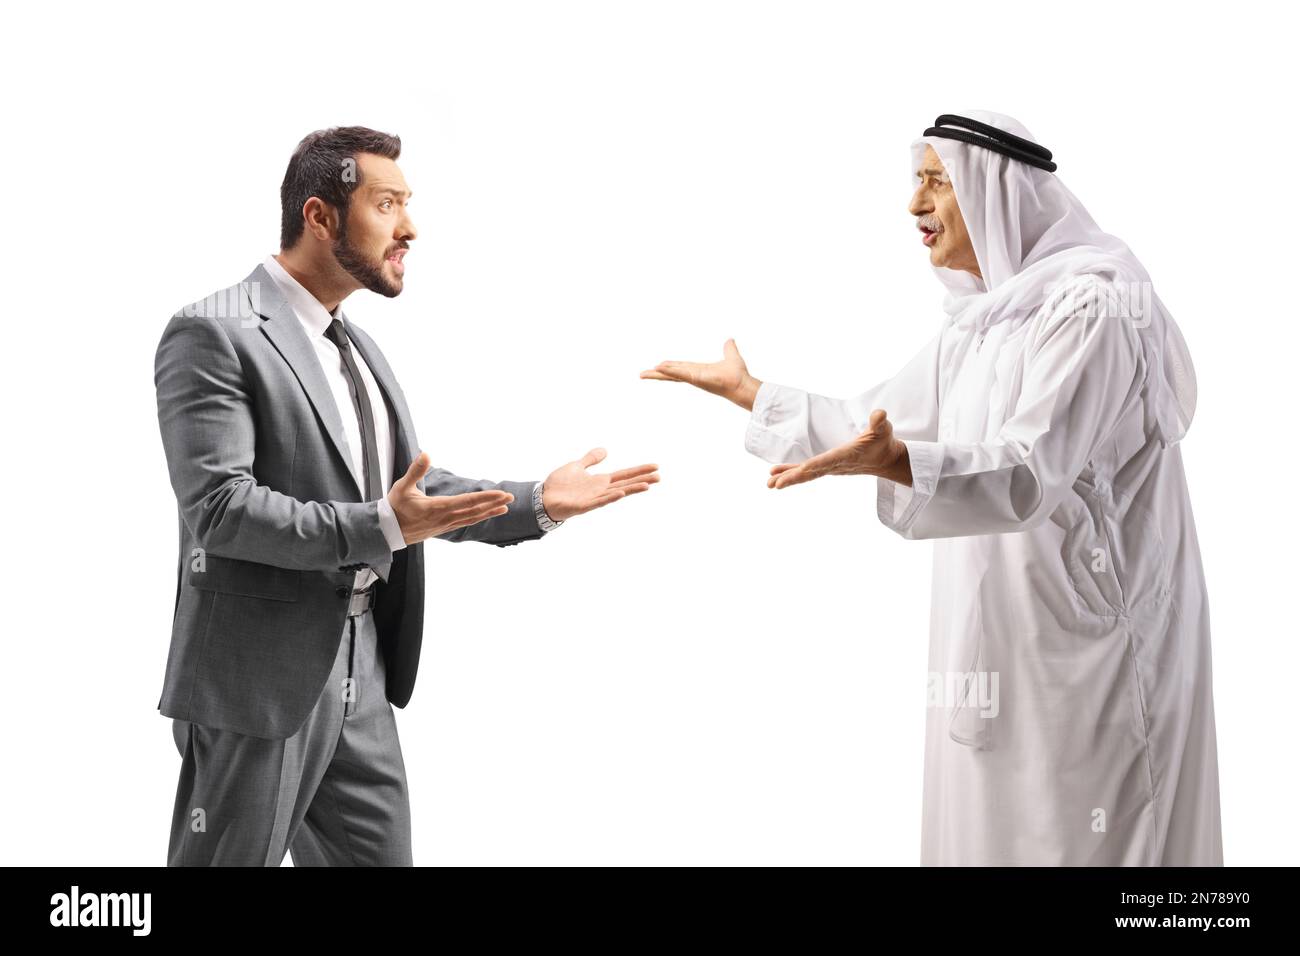 Businessman arguing with a mature arab man isolated on white background Stock Photo